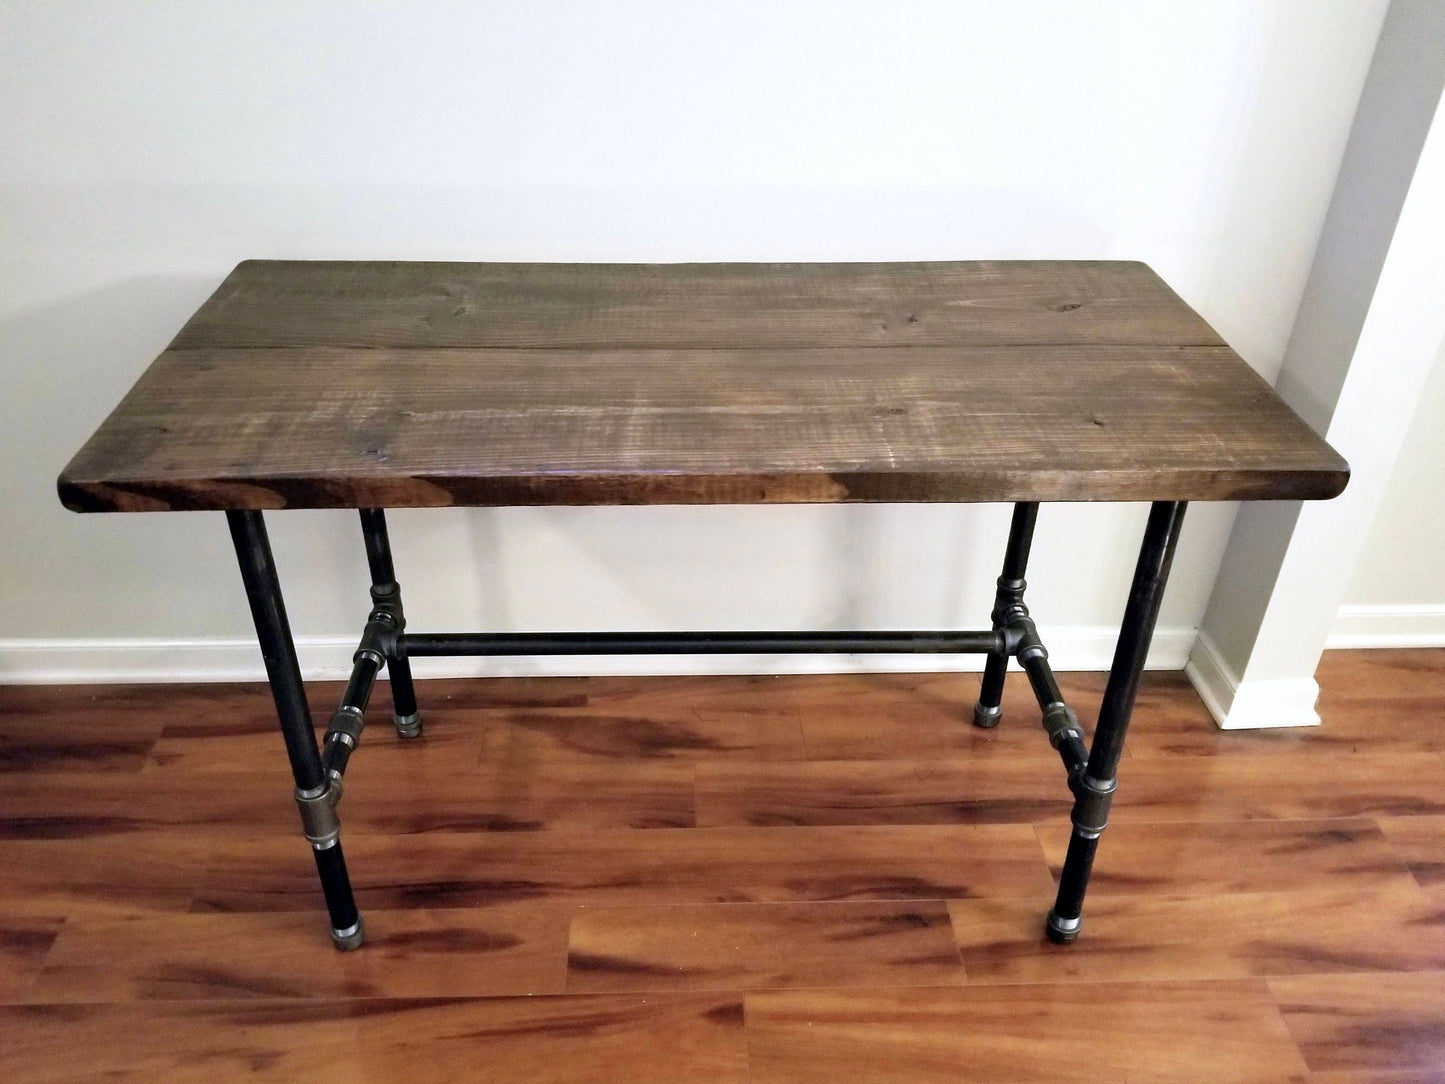 Steel and Wood Desk - Large Gas Iron Pipe Office Desk - Free Shipping